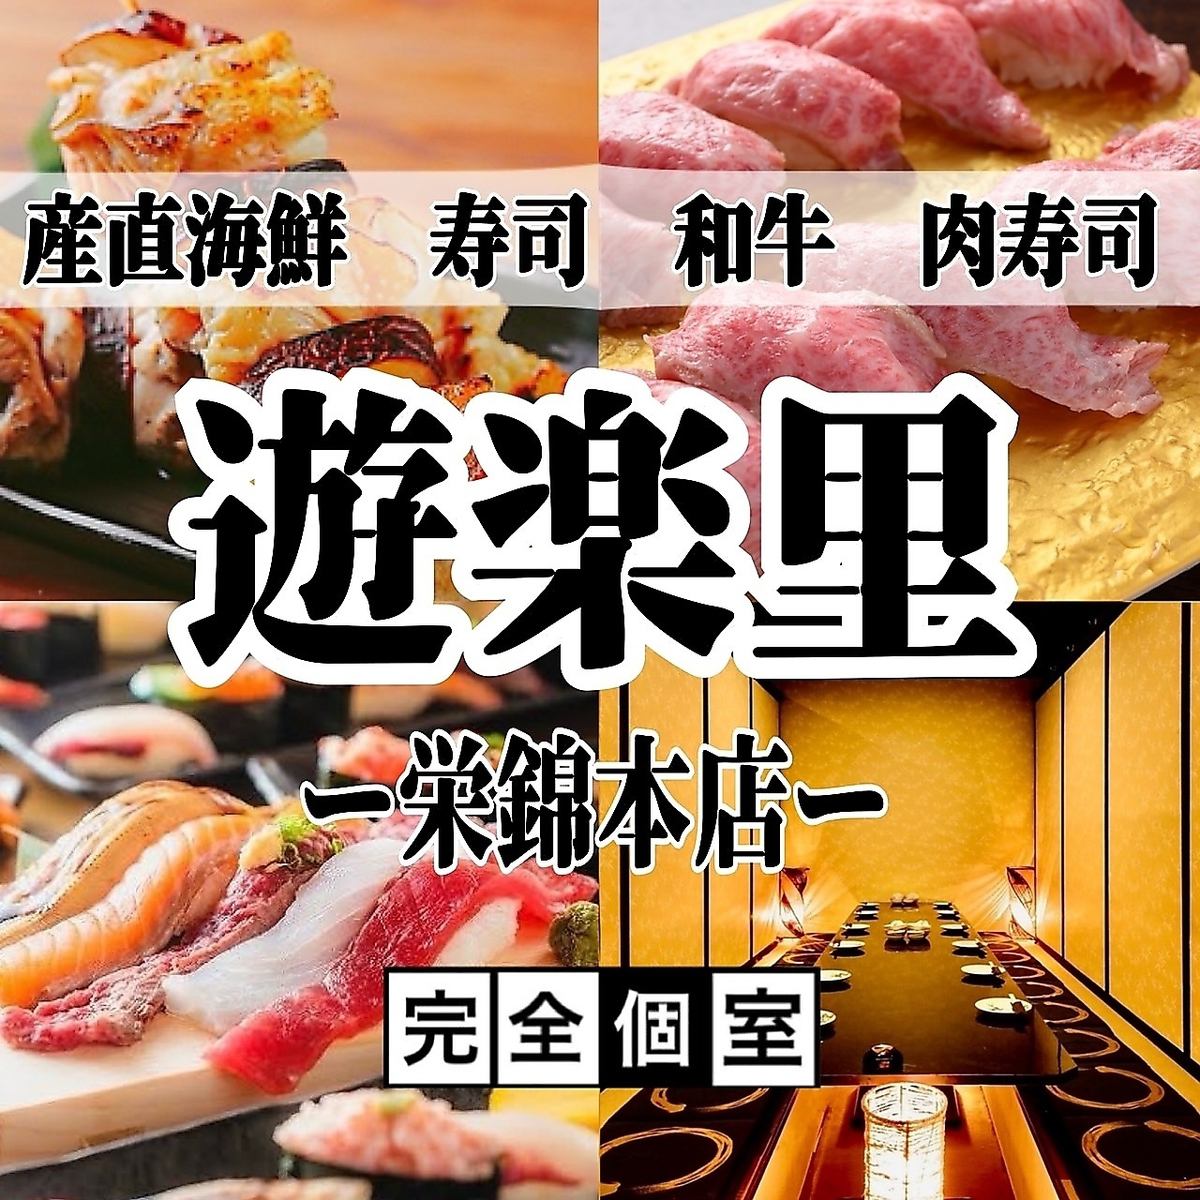 ★1 minute walk from Sakae Station Authentic cuisine available in all-you-can-eat and drink plan ♪ From 2980 yen for 3 hours